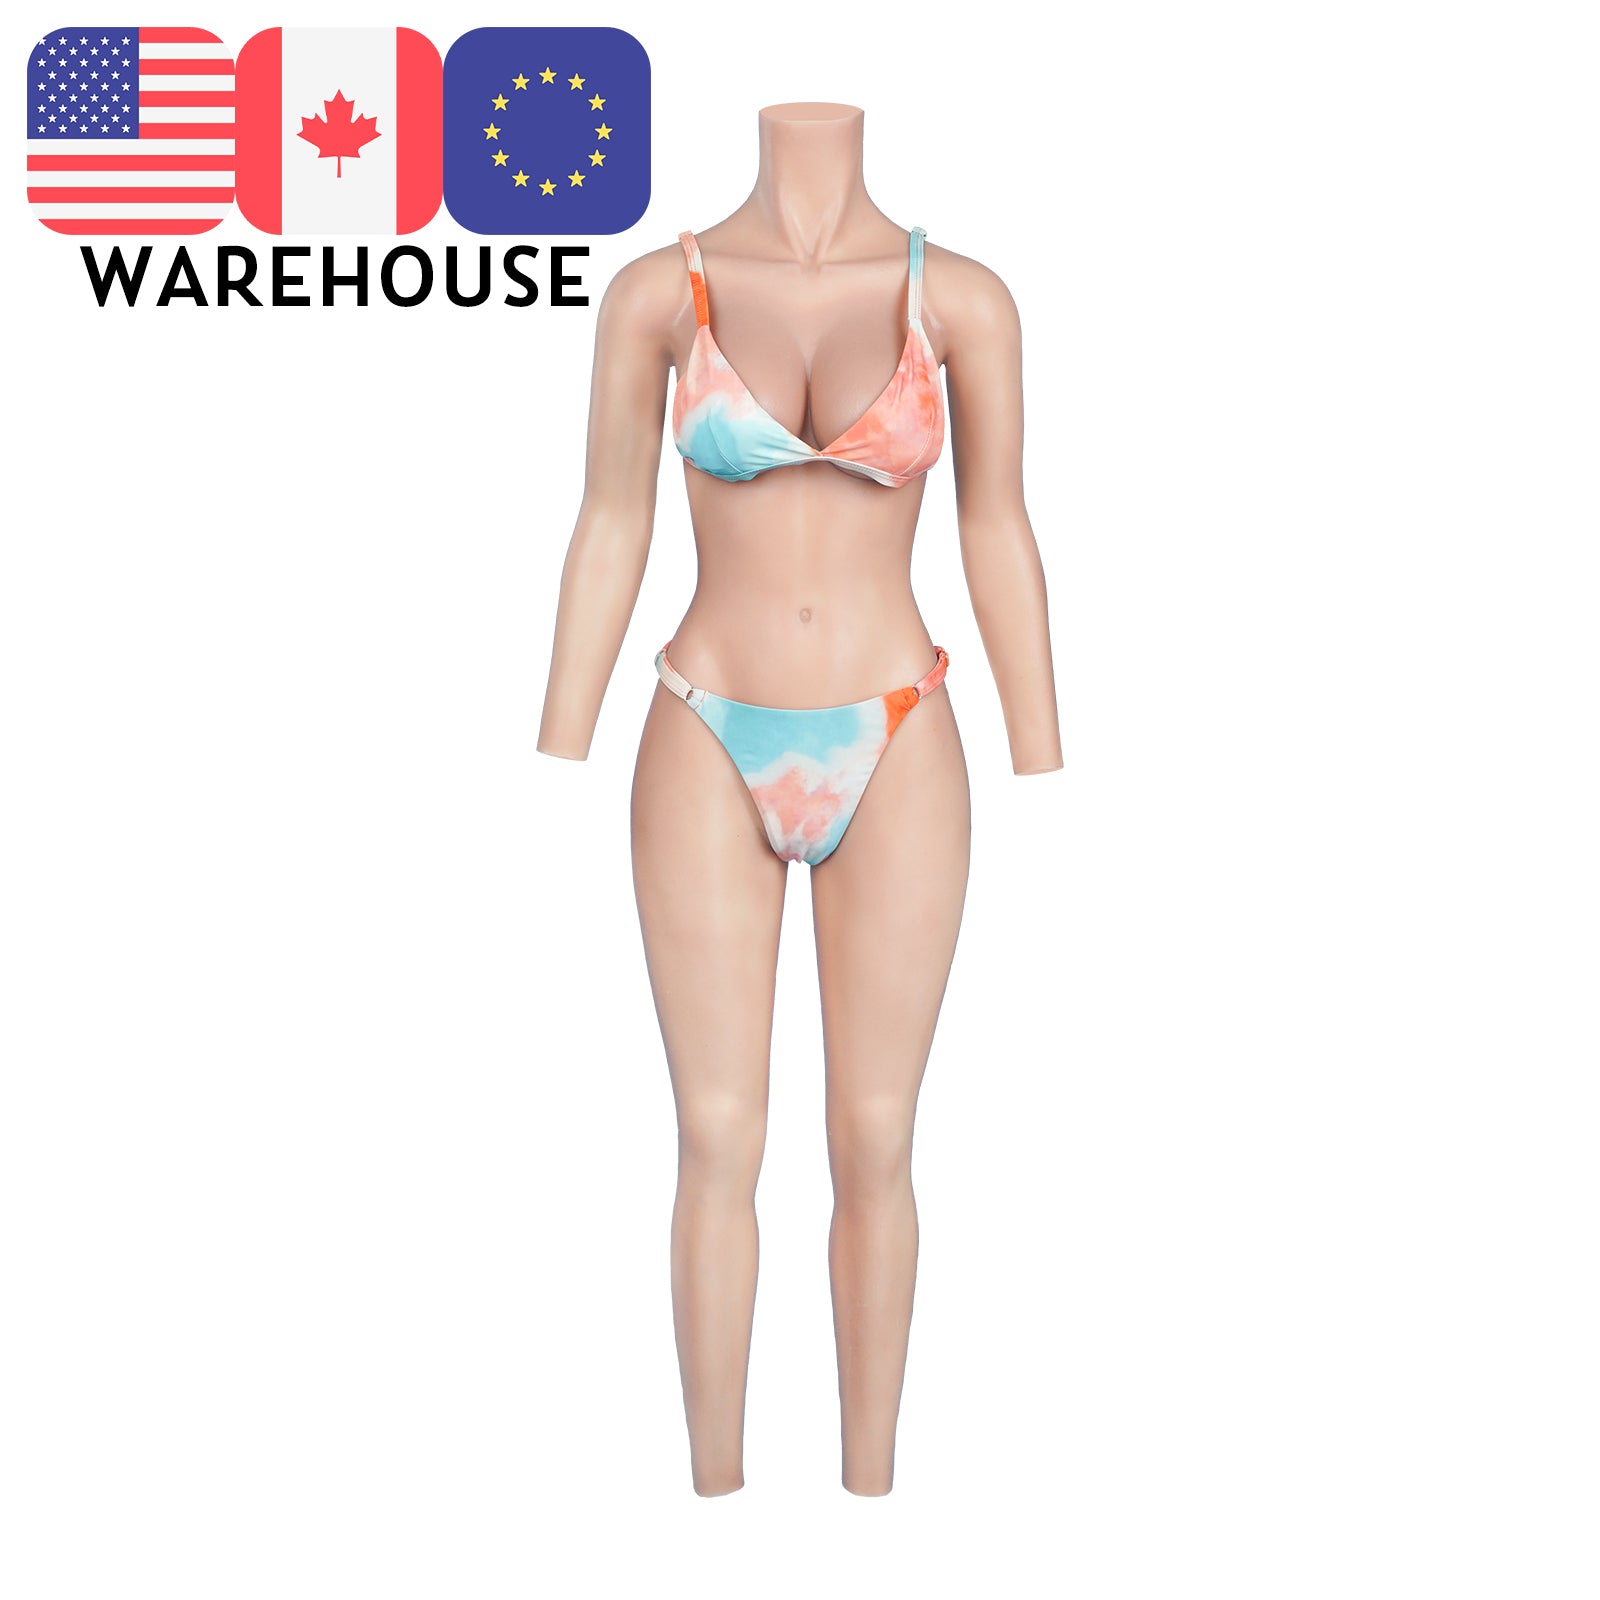 C-E Cup Full Bodysuit with Sleeve 4G